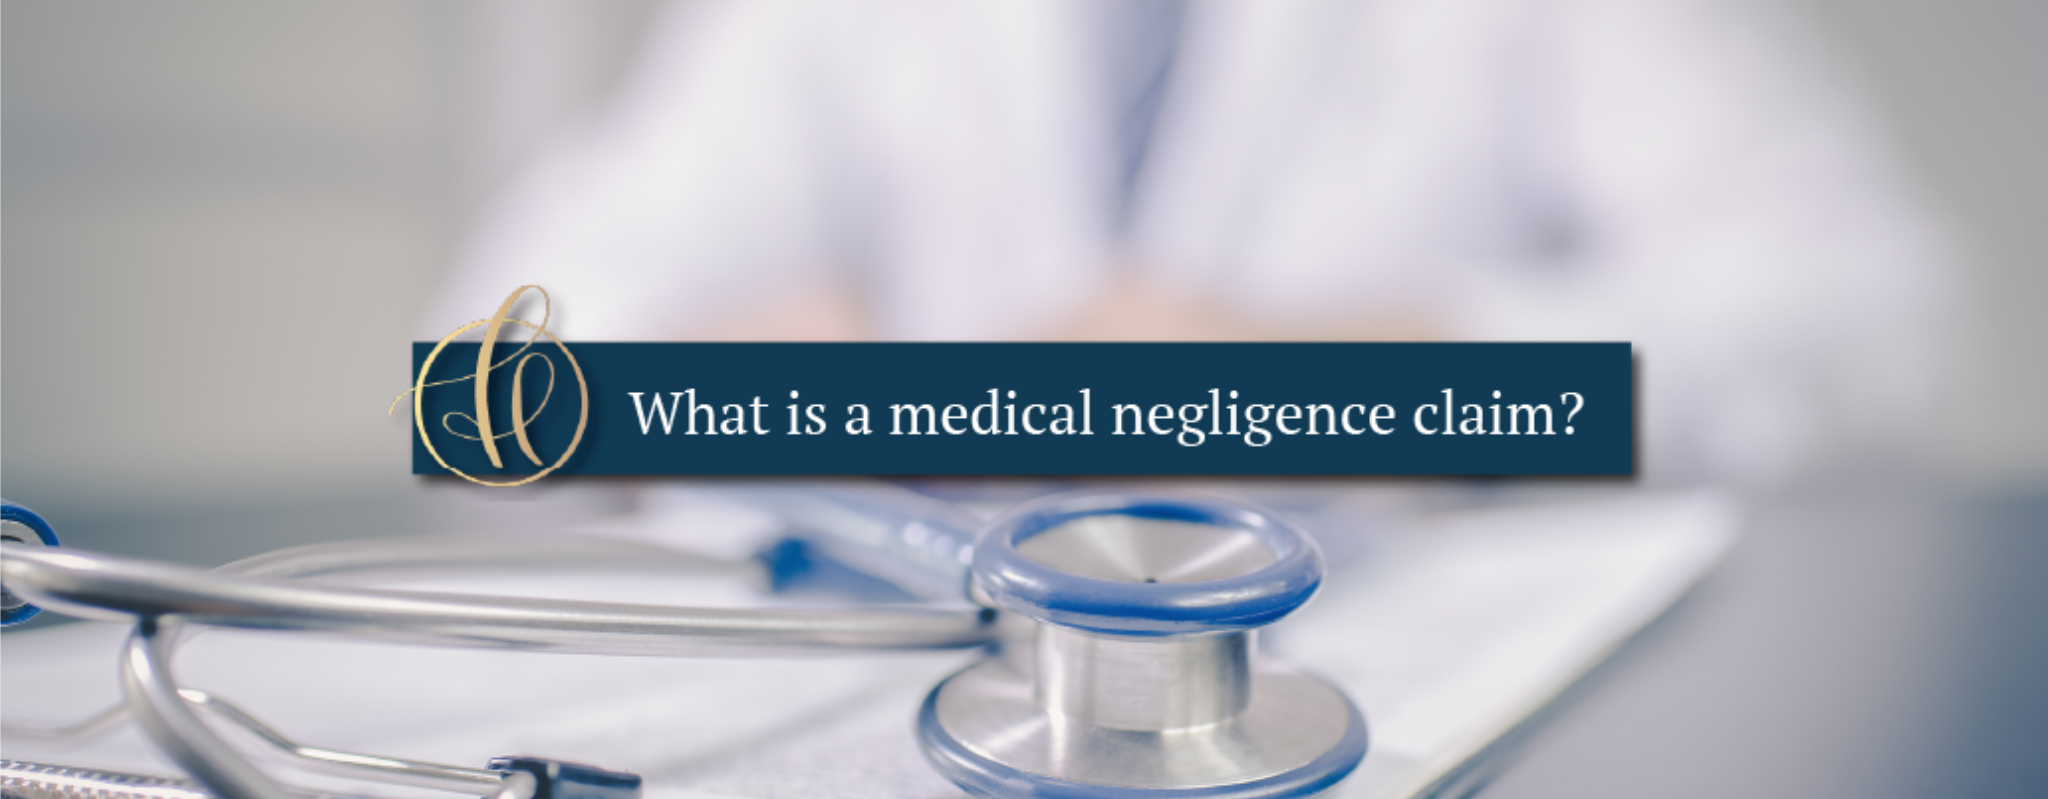 What is a medical negligence claim?